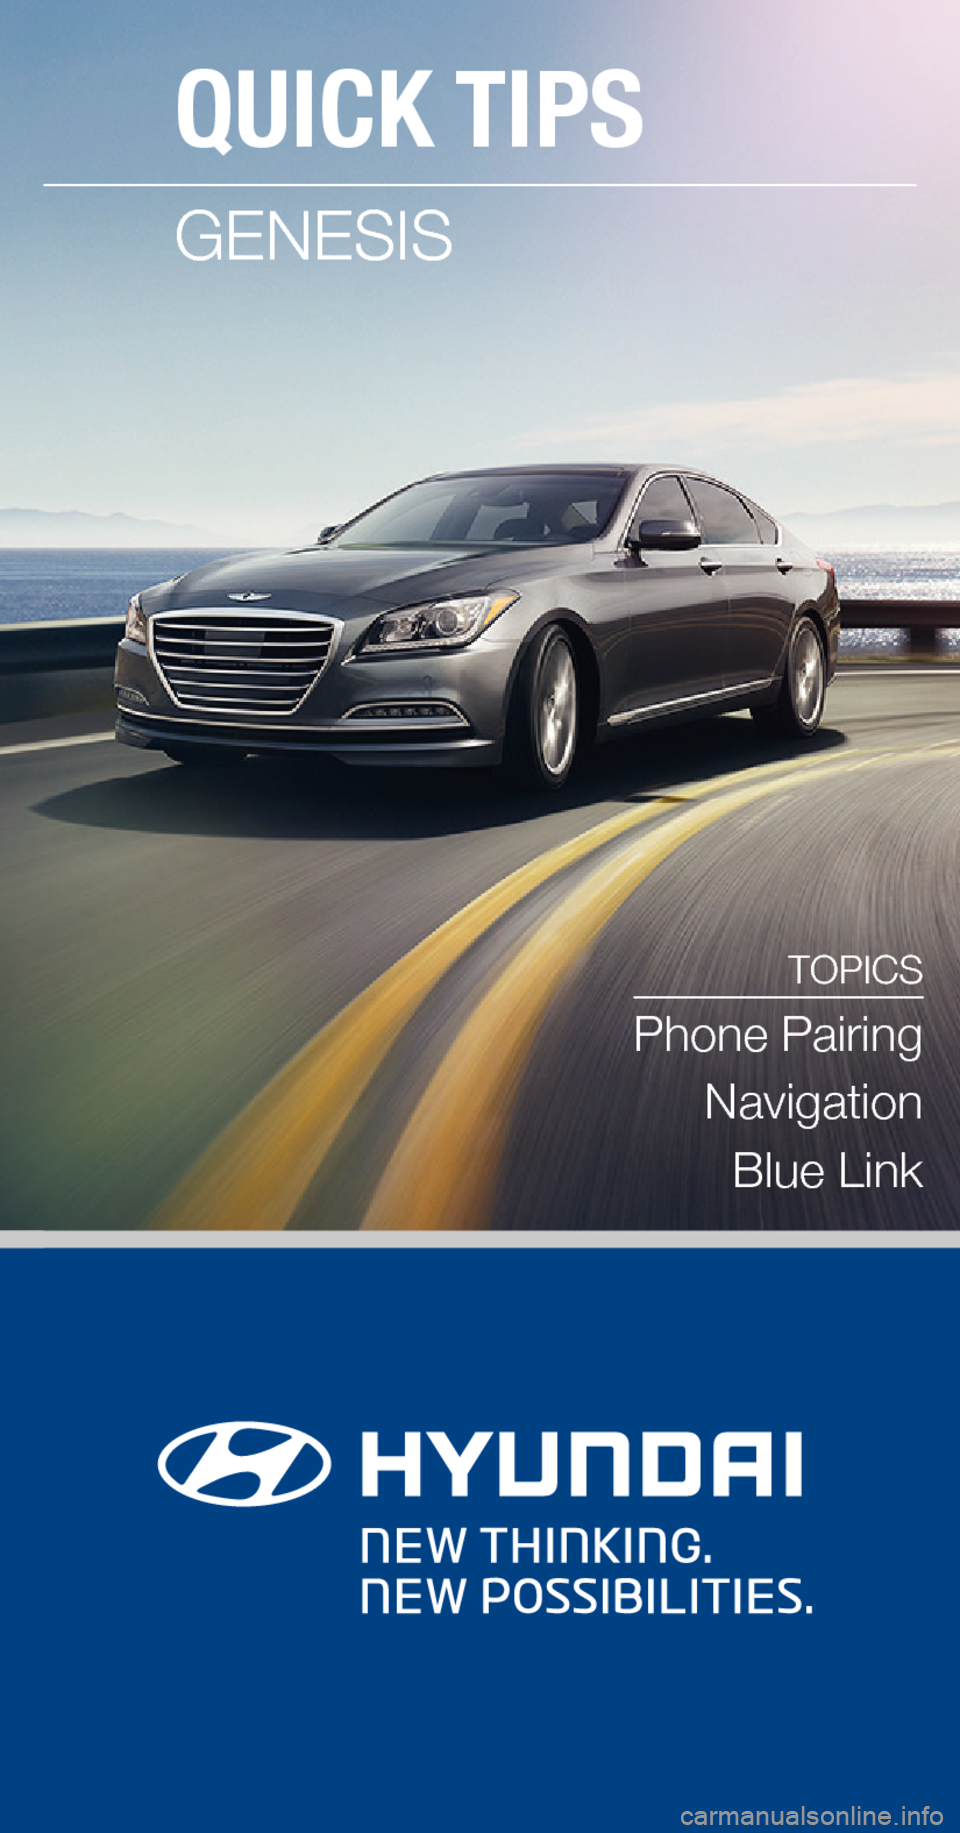 Hyundai Genesis 2015  Quick Tips To start voice command, press the TALK button
HELP provides guidance on commands that can  be used within the current function
CALL calls a name saved in Contacts  Example: “CALL JOHN SMITH”
DIAL 